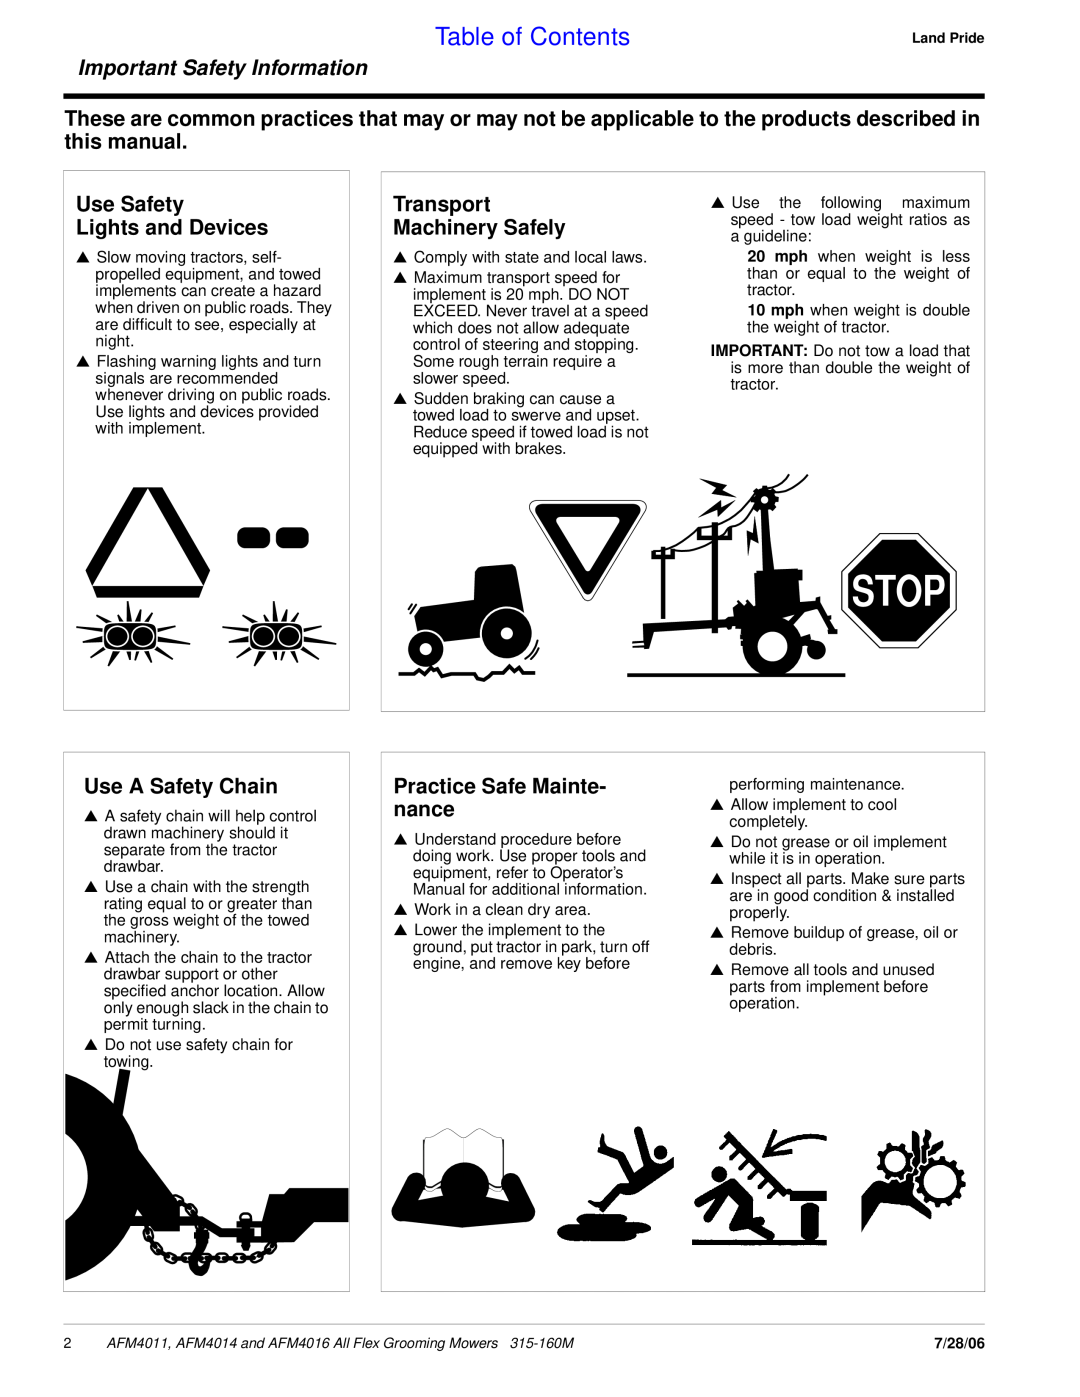 Land Pride AFM4016 Table of Contents, Important Safety Information, Use Safety Lights and Devices, Use A Safety Chain 